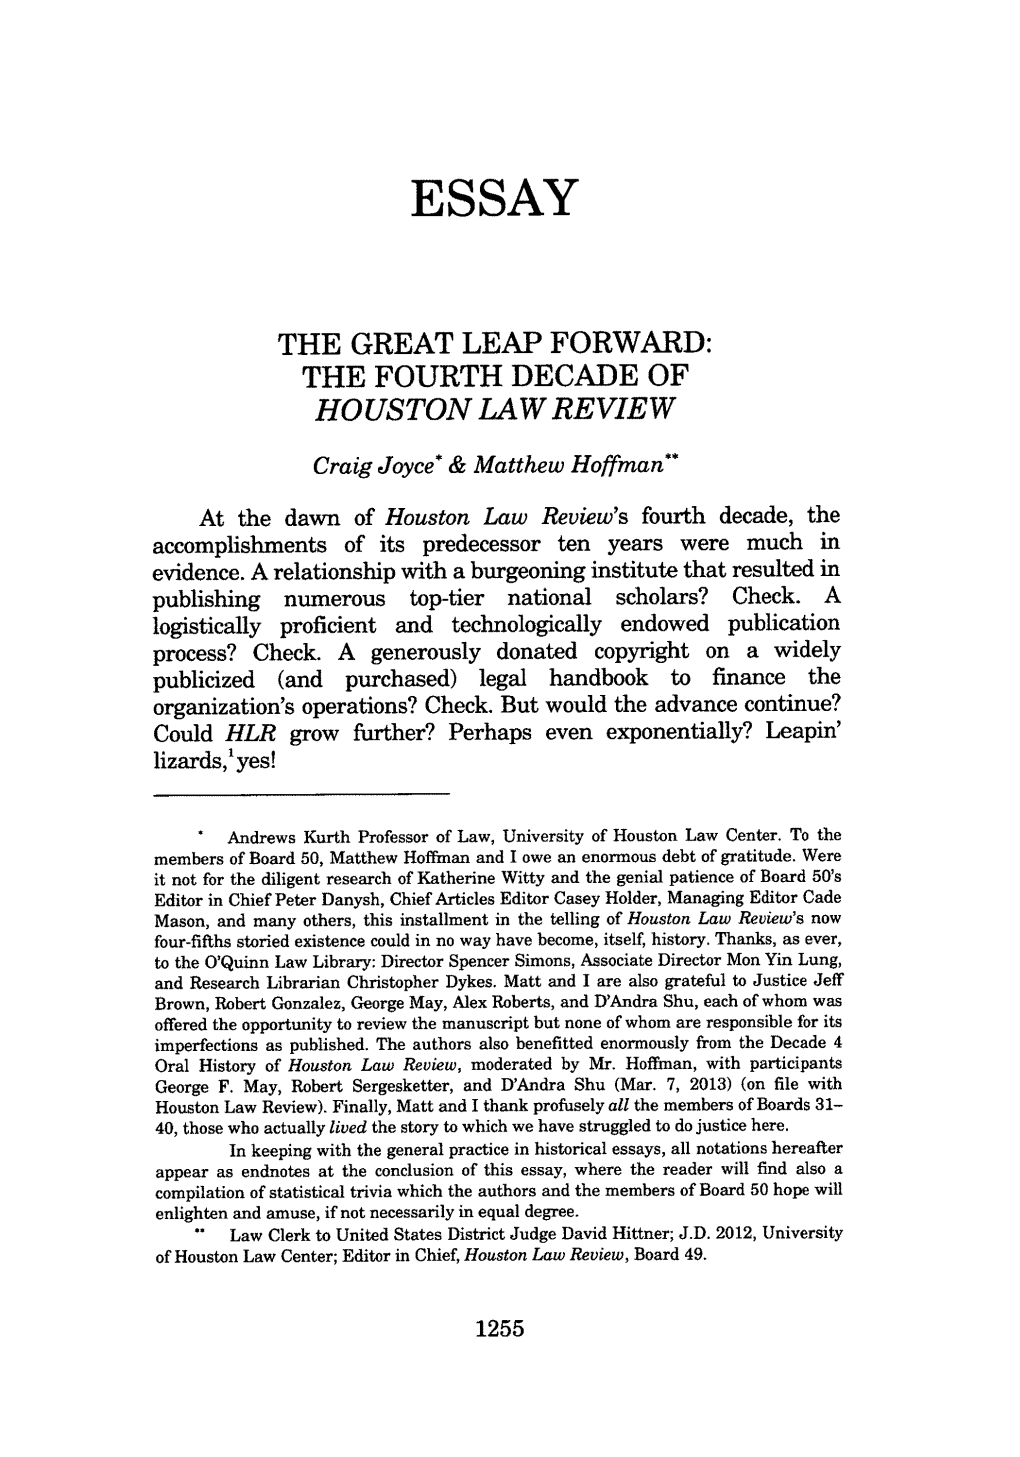 The Fourth Decade of Houston Law Review